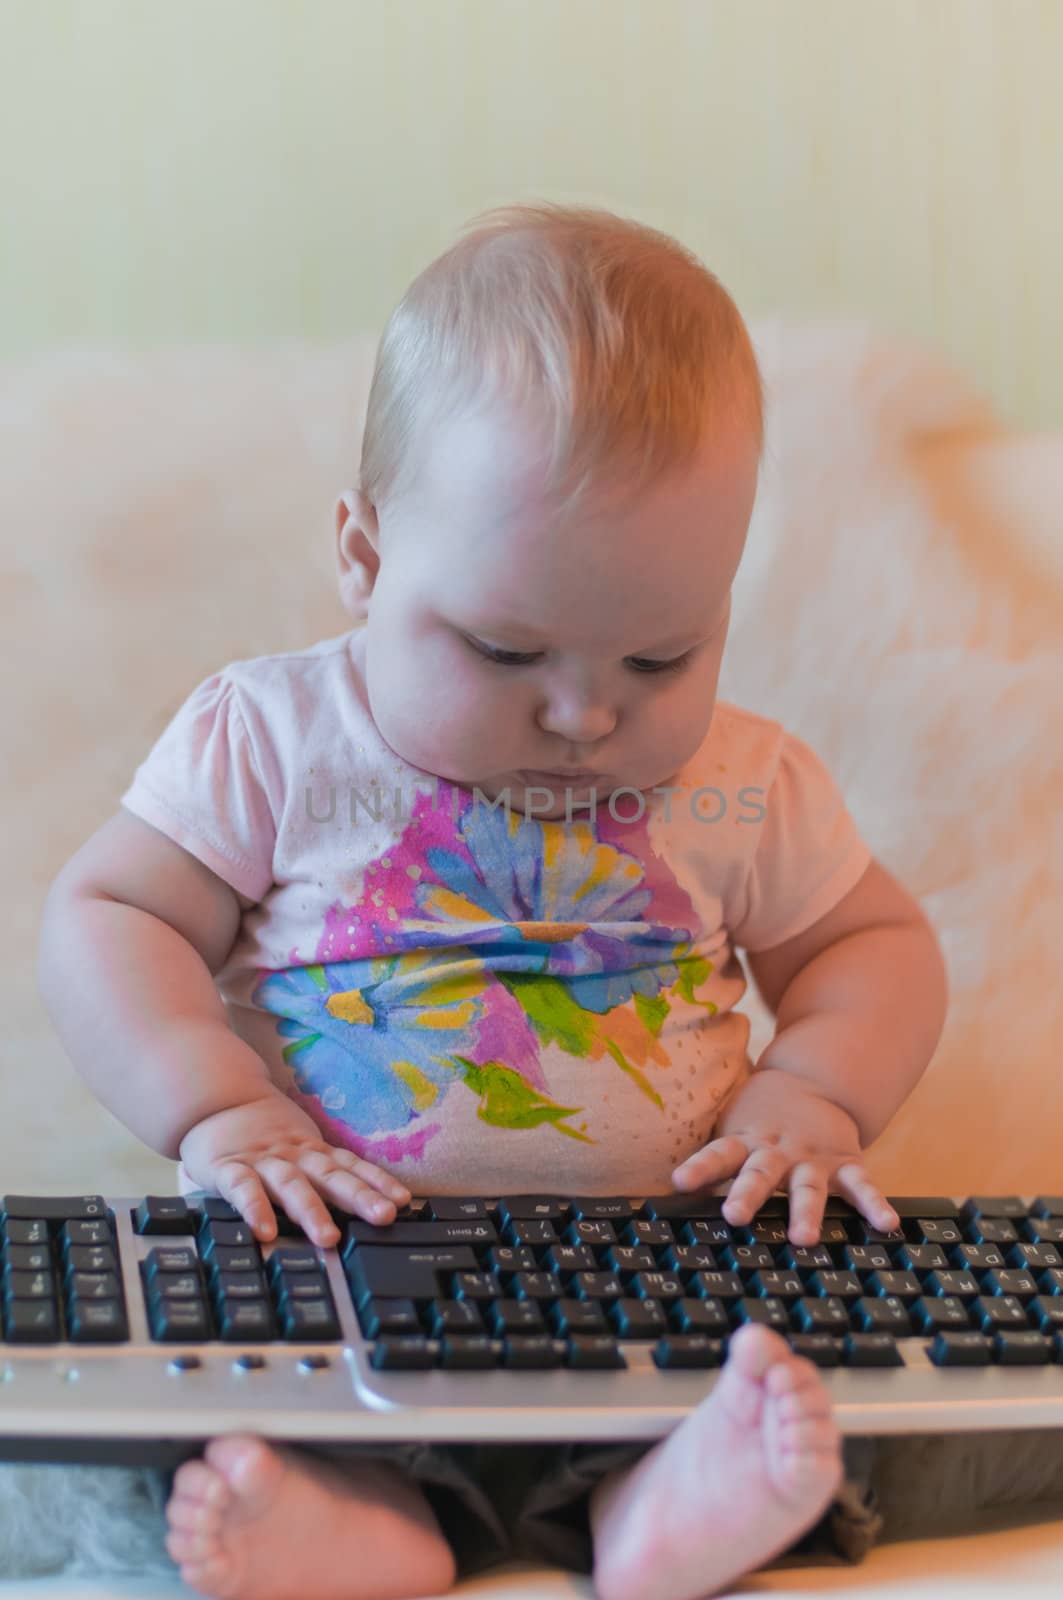 Portrait of baby in t-shirt with keyboard